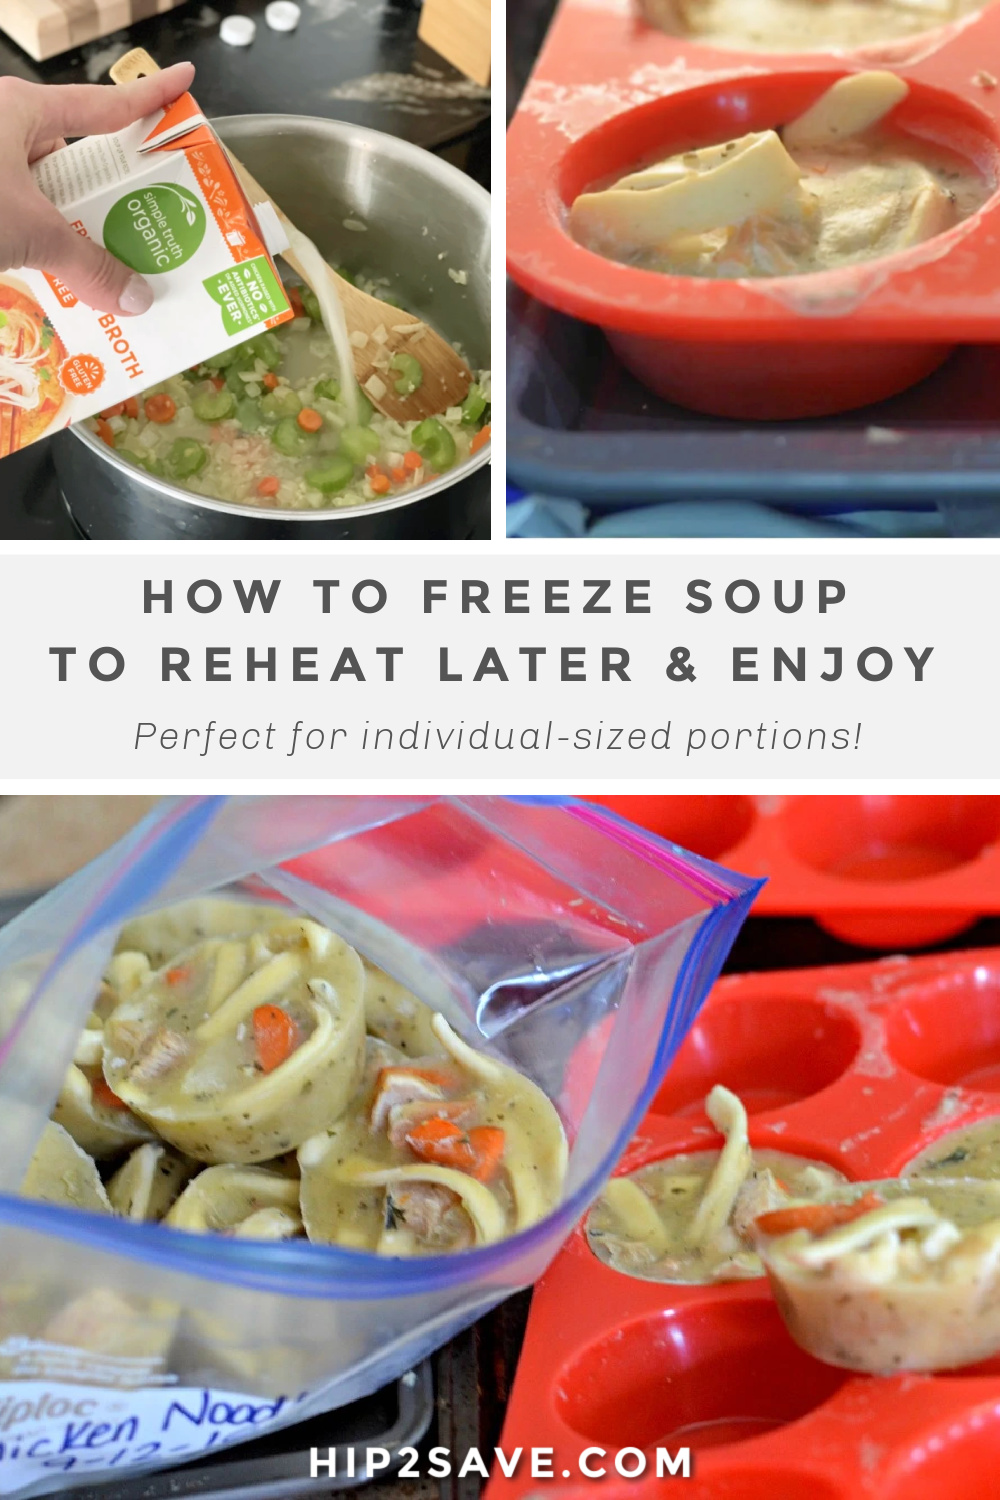 https://hip2save.com/wp-content/uploads/2016/09/how-to-freeze-soup-pinterest.jpg?fit=1000%2C1500&strip=all